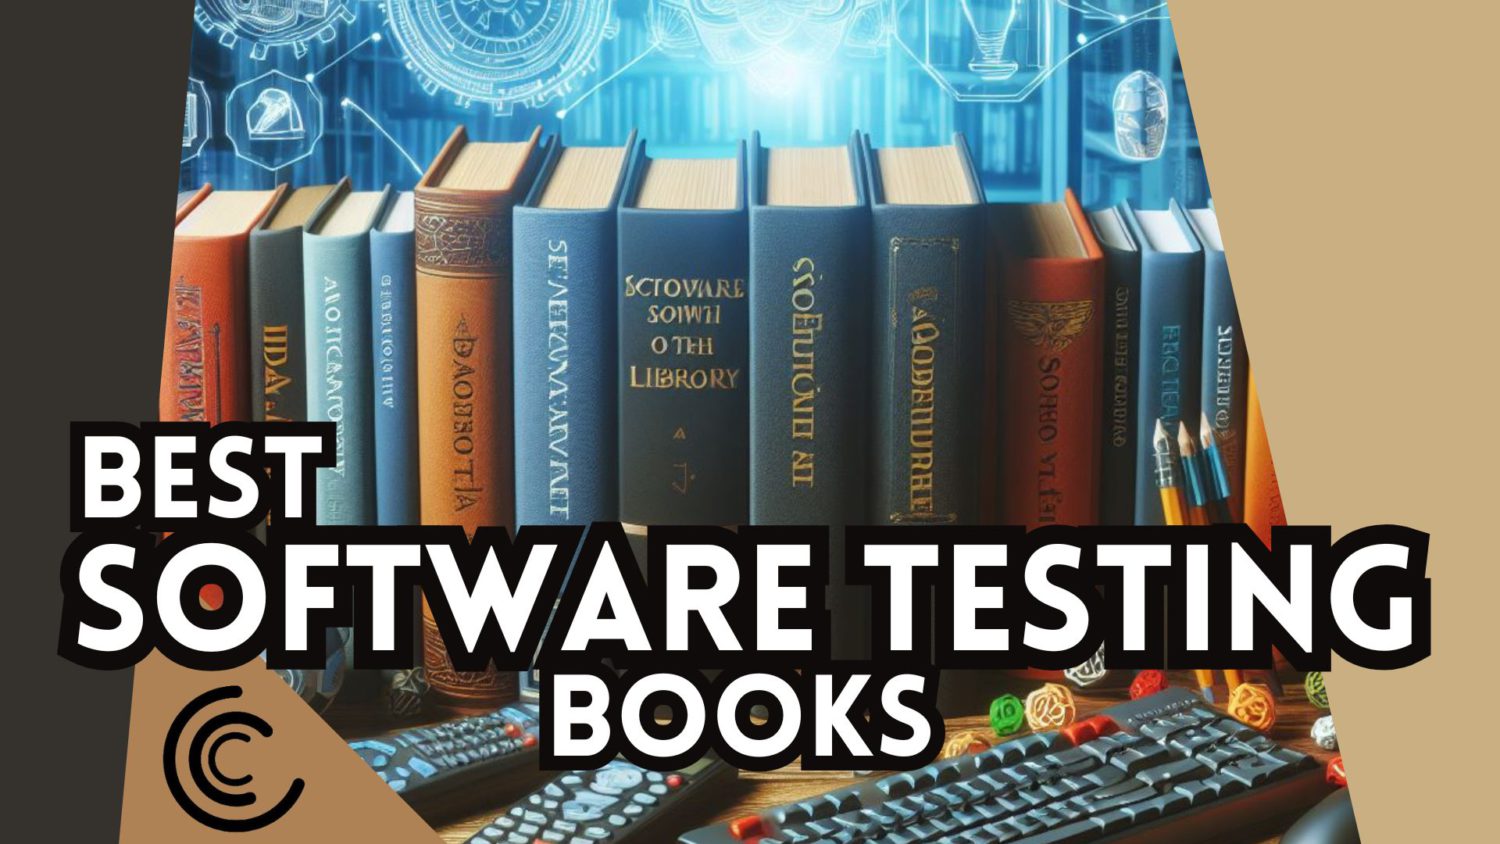 Best Software Testing Books